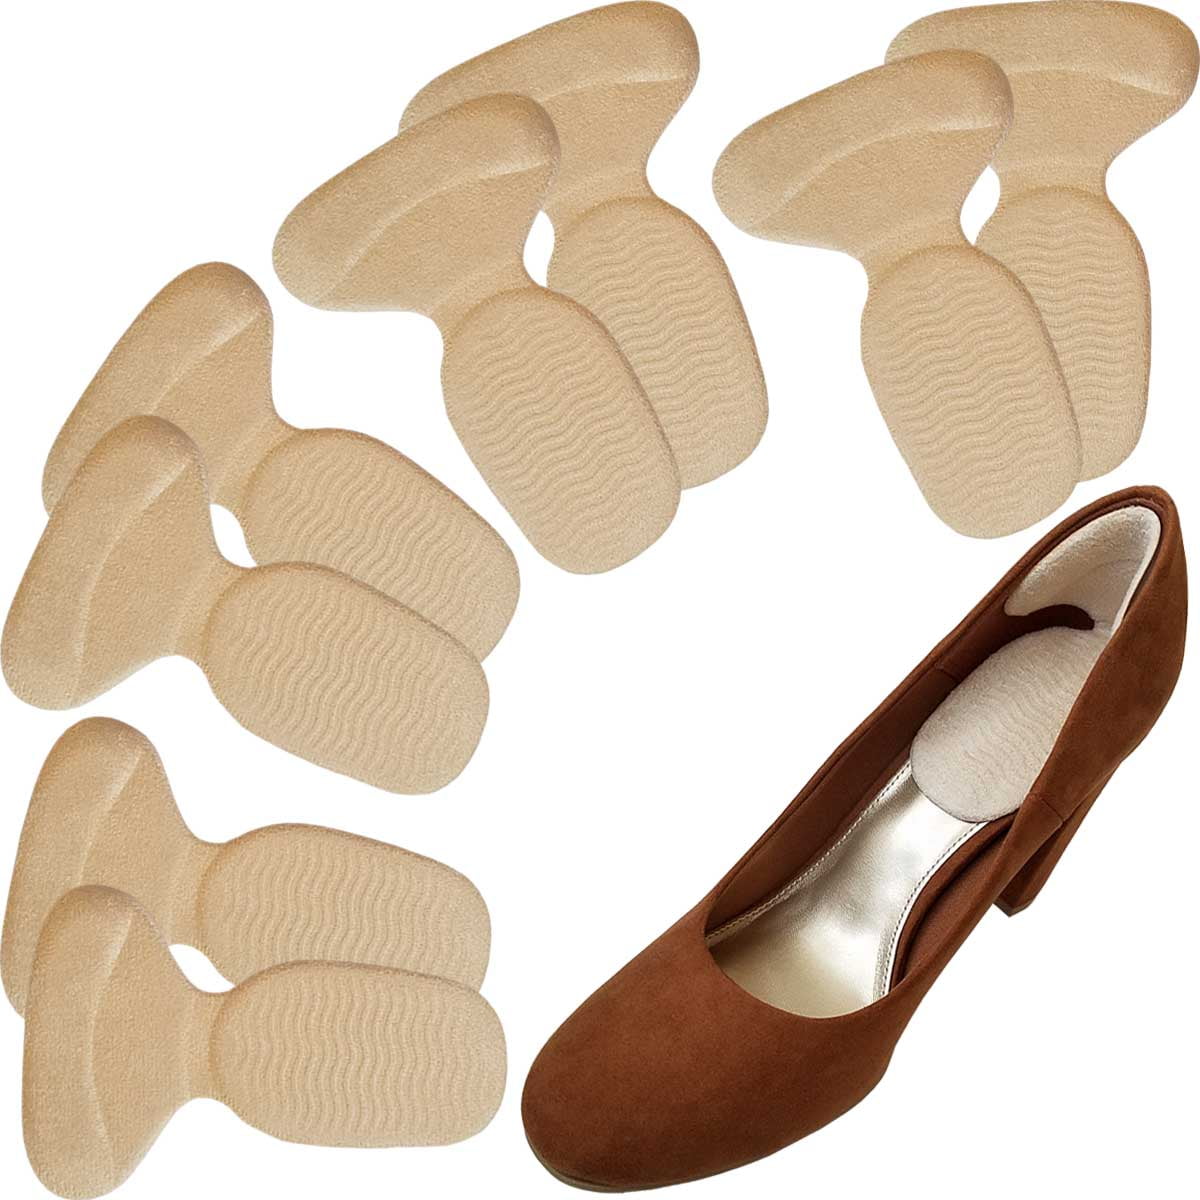 6 Pairs Heel Cushion Pads Shoe Grips Liner Self-adhesive Multicolor 